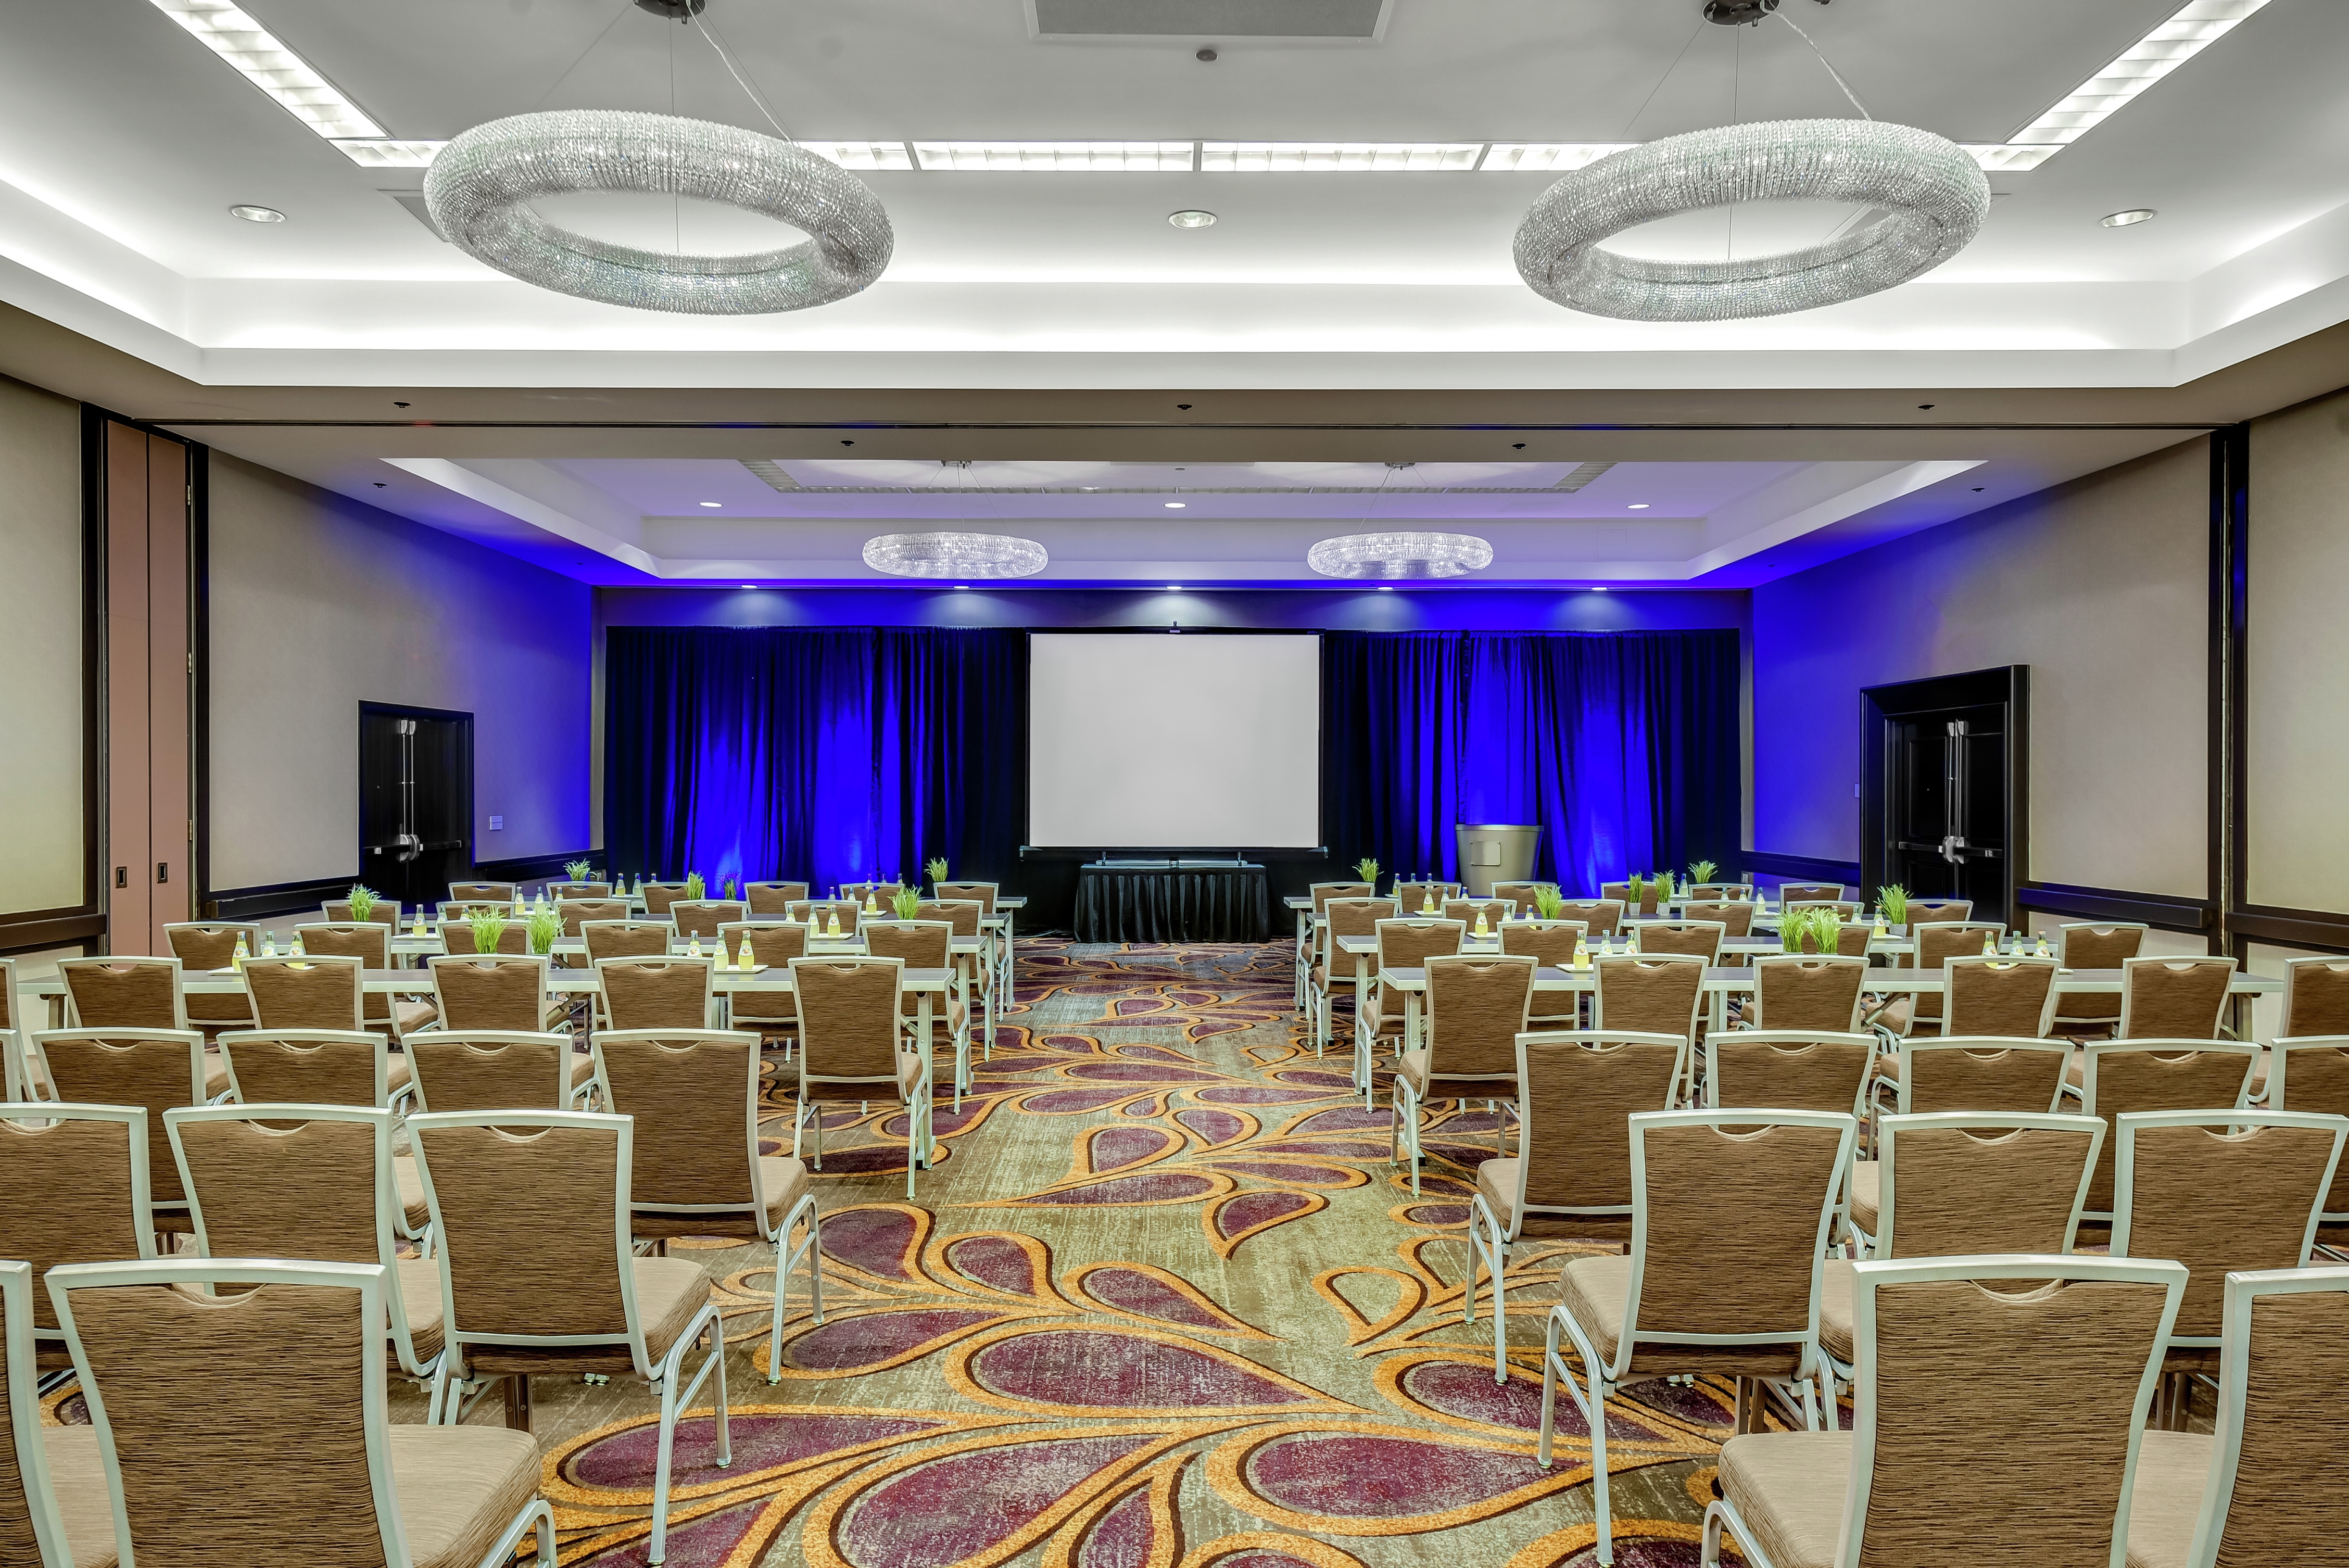 DoubleTree Hotel Meeting Room with Projector Screen and Chairs